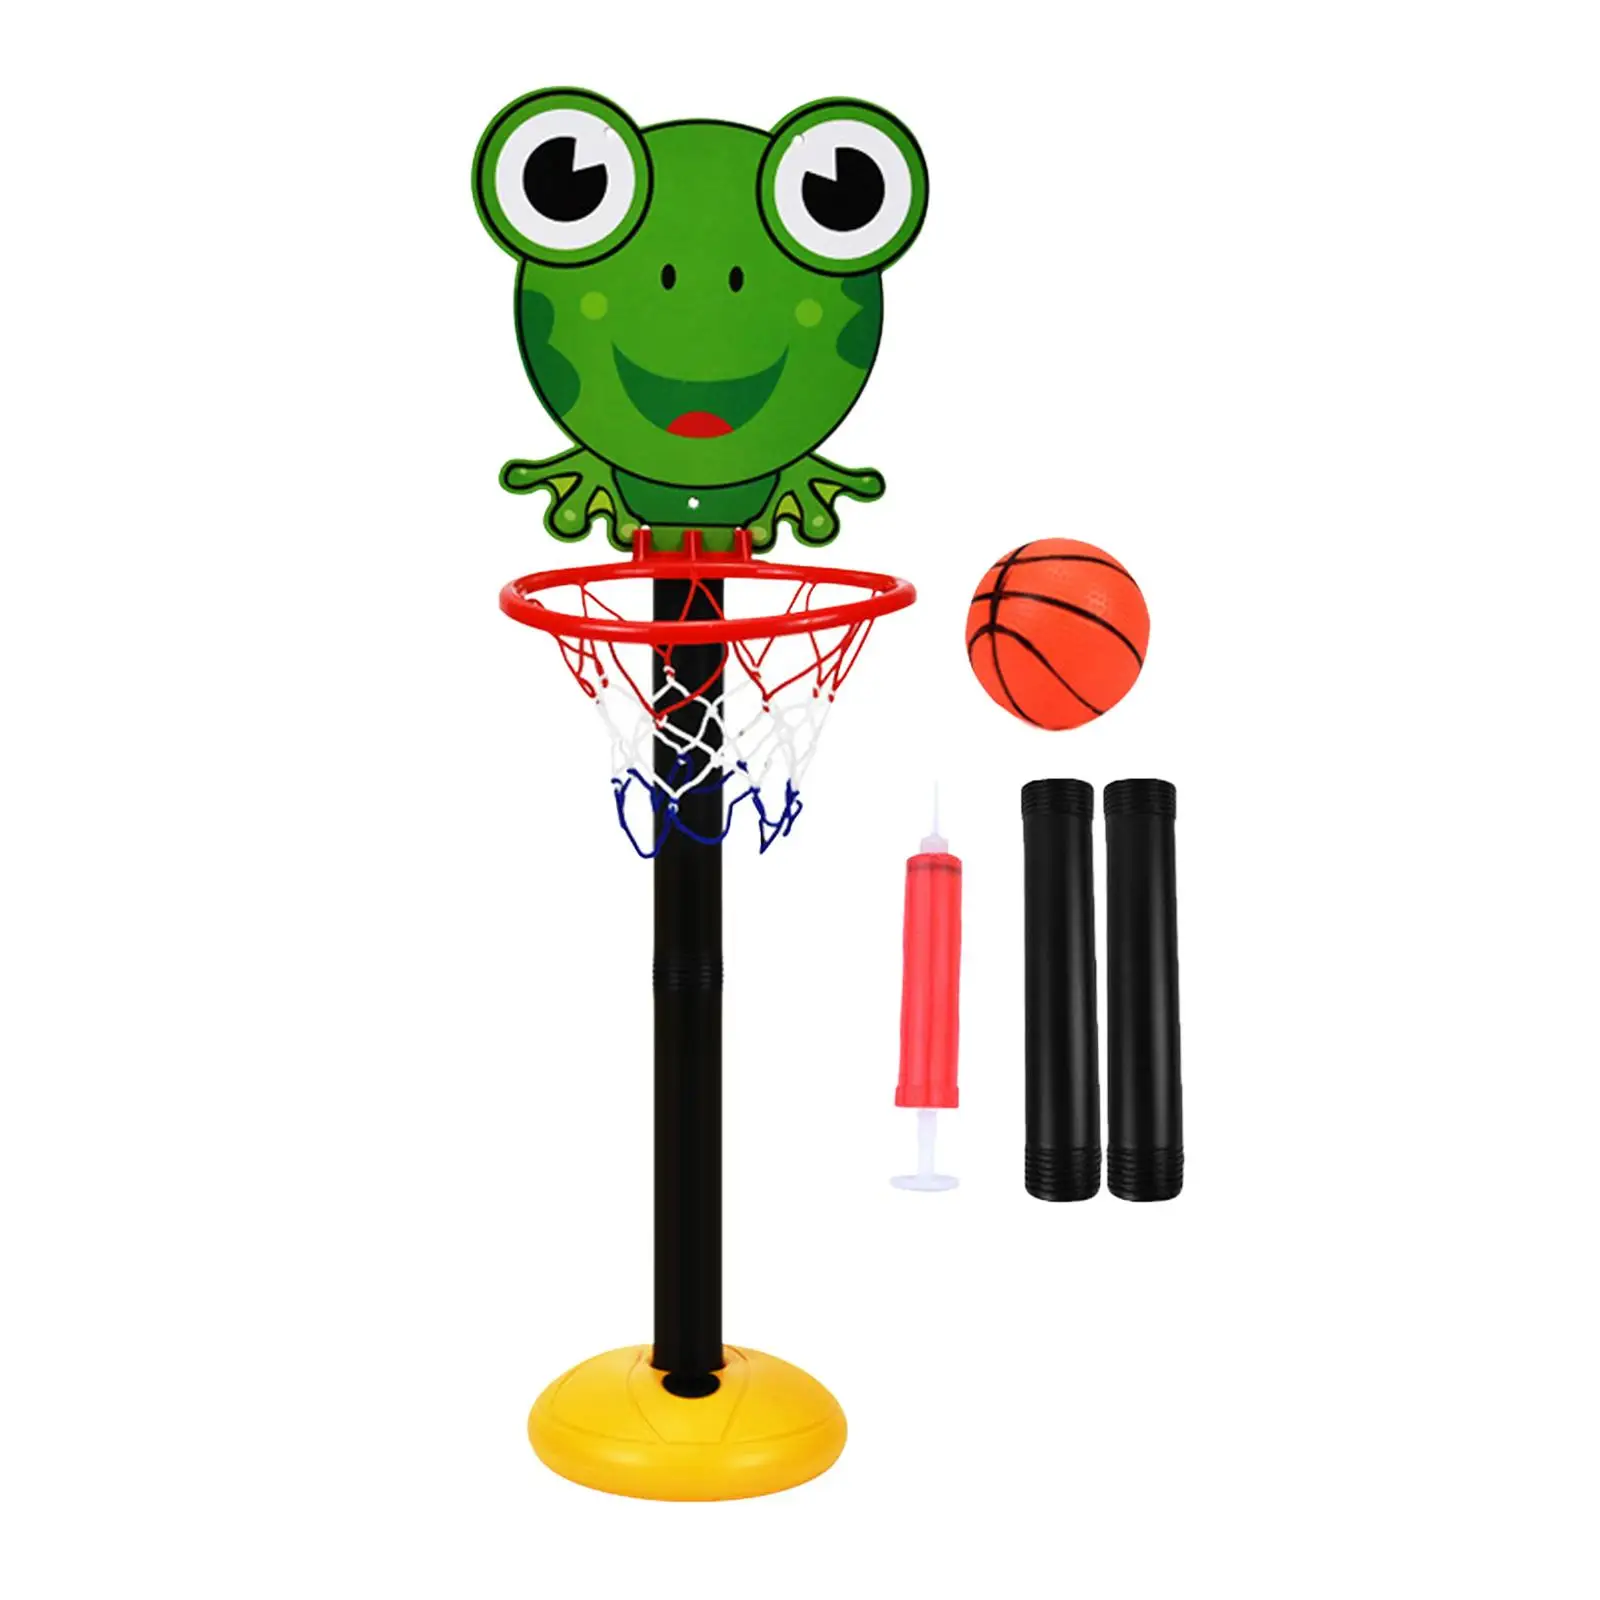 Creative Basketball Hoop Stand Kit Adjustable Height Animals Game with Net Board Sport for Kids Toddler Outside